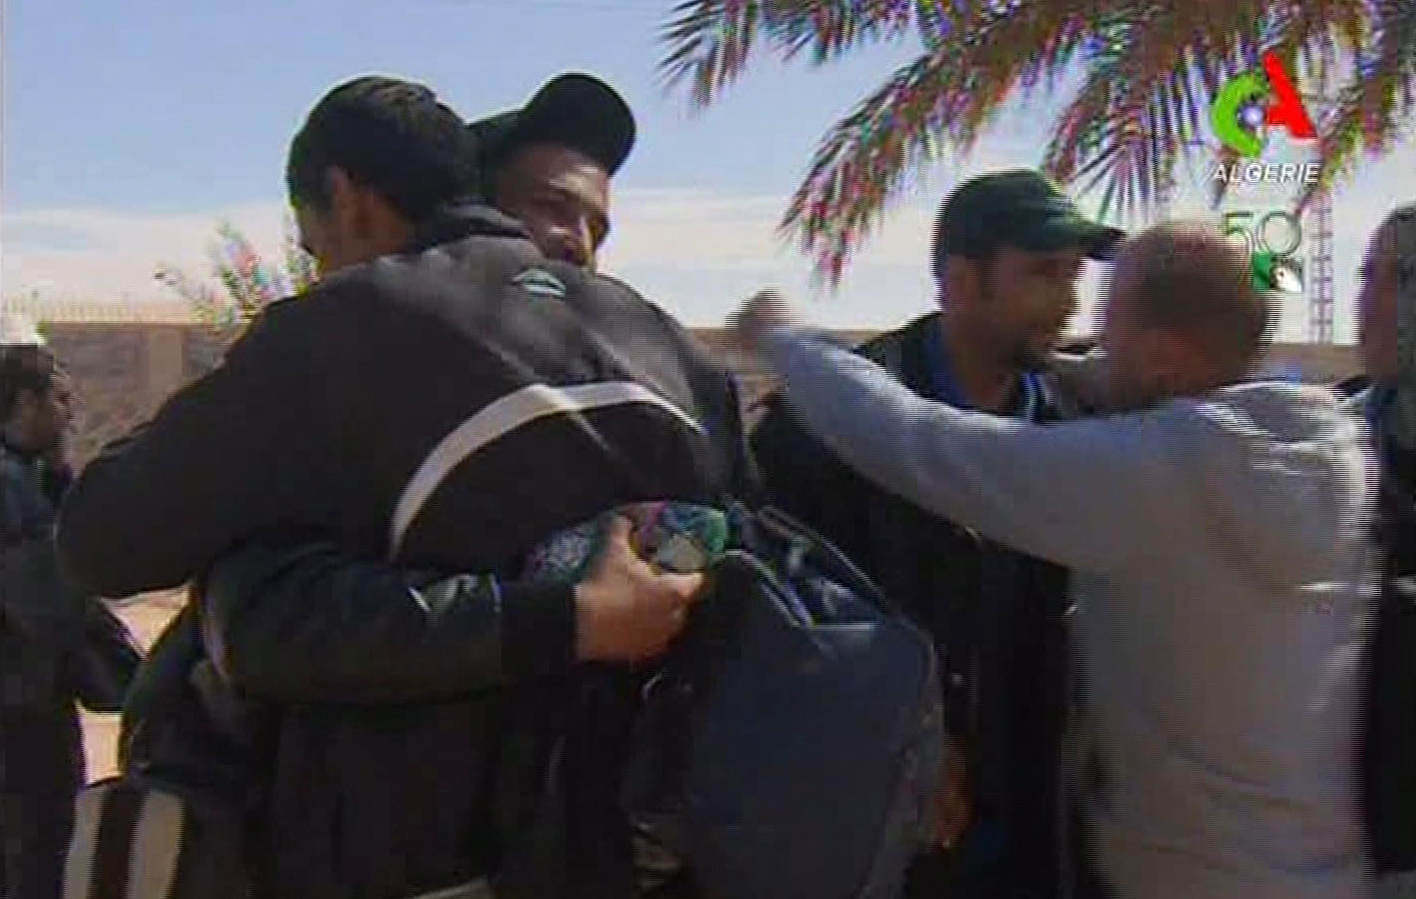 Rescued hostages hug each other in Ain Amenas, Algeria, in this image taken from television Friday. Algeria's state news service says nearly 100 out of 132 foreign hostages have been freed from a gas plant where Islamist militants had held them captive for three days.